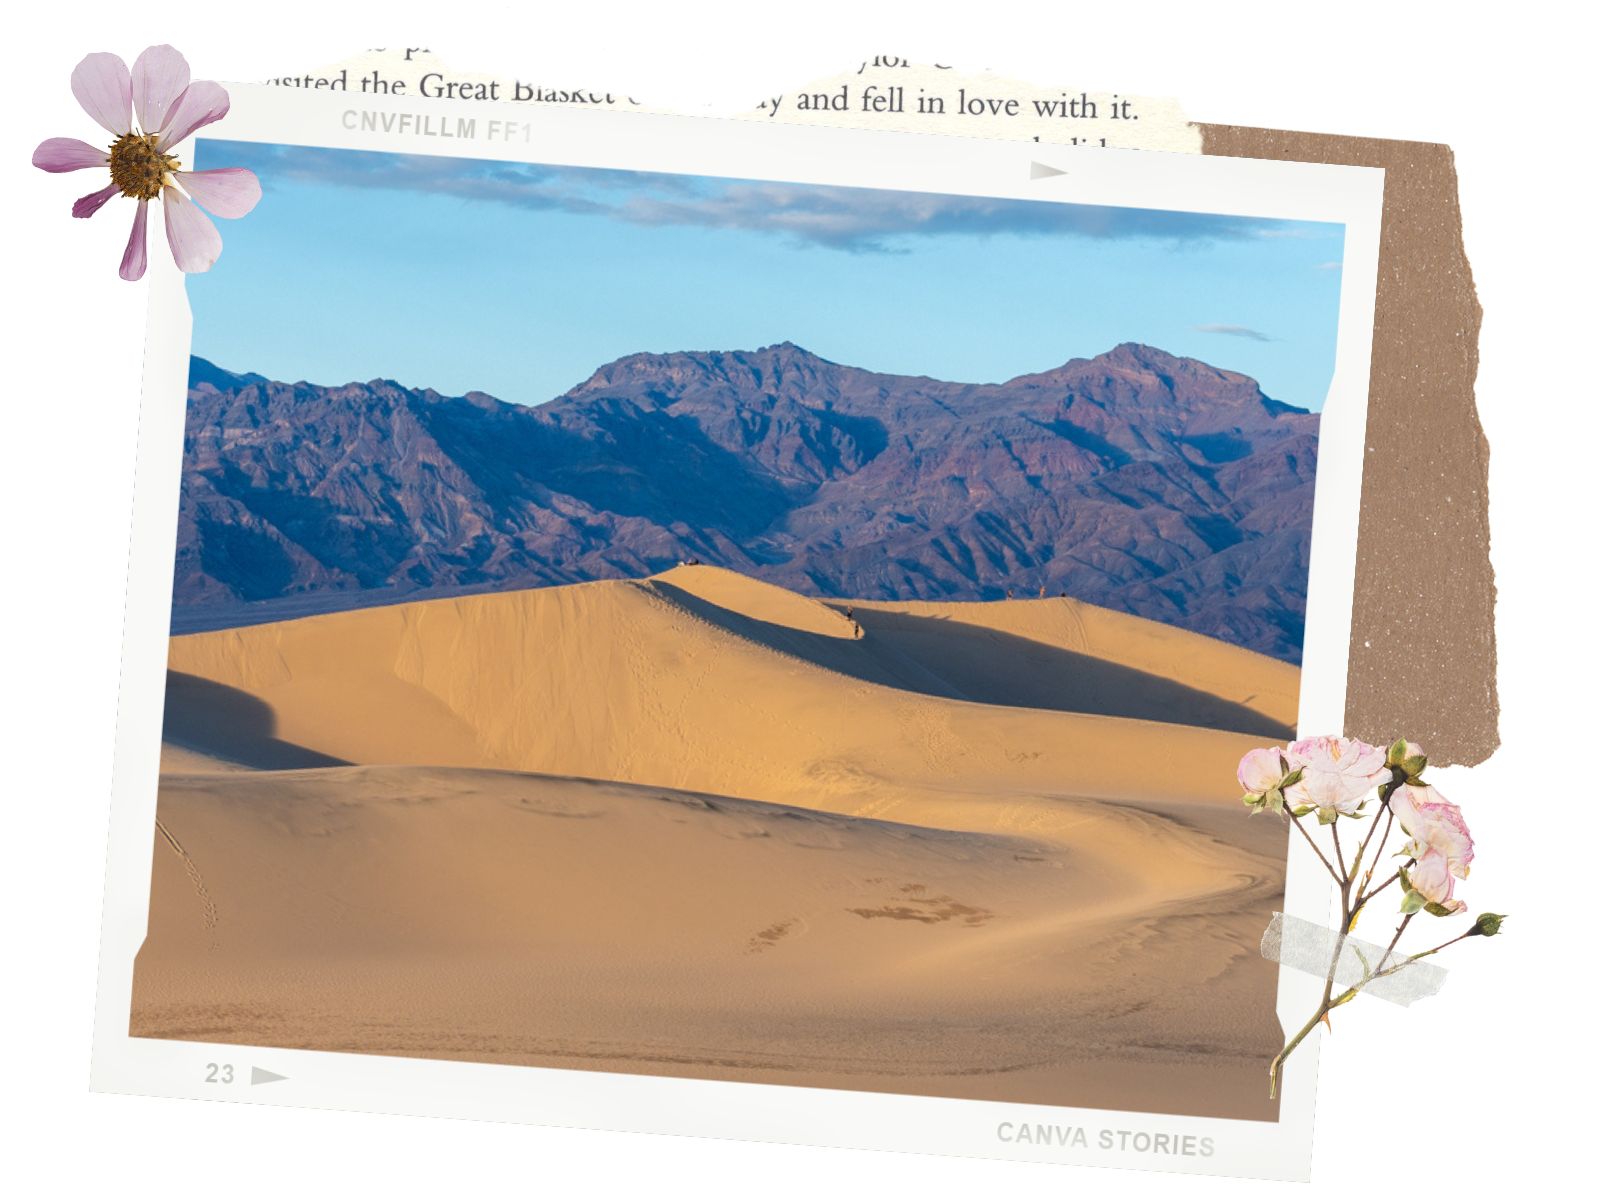 What You Need to Know 1 - Mesquite Flat Sand Dunes in Death Valley National Park